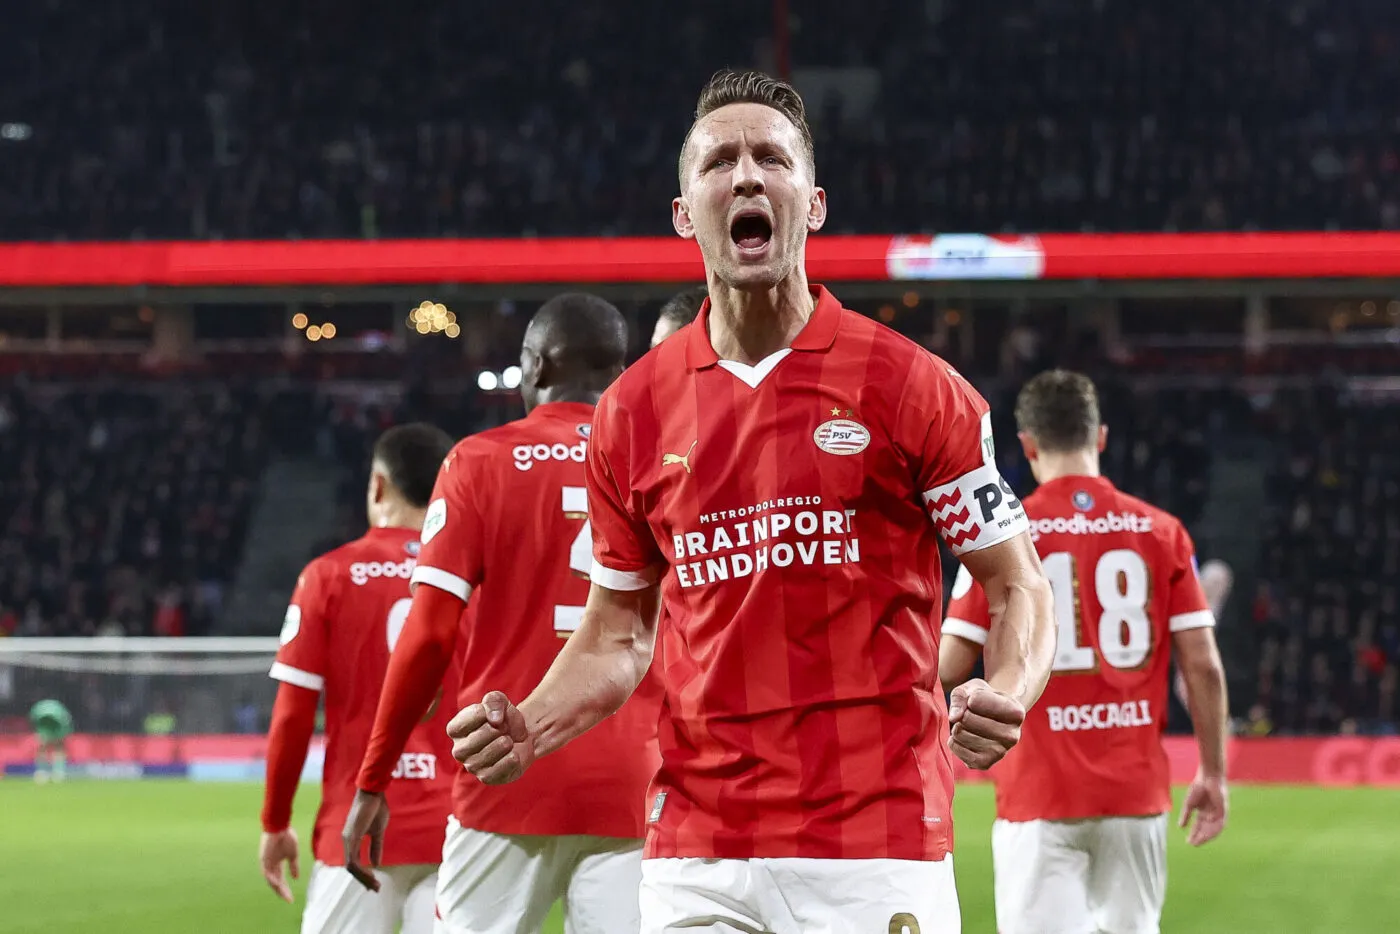 EINDHOVEN, 16-02-2024, Philips Stadium, Dutch football Eredivisie season 2023 / 2024, Match between PSV - Heracles, PSV player Luuk de Jong celebrating the goal 1-0 - Photo by Icon Sport during the Eredivisie match between PSV Eindhoven and Heracles Almelo at Philips Stadion on February 16, 2024 in Eindhoven, Netherlands. (Photo by ProShots/Icon Sport)